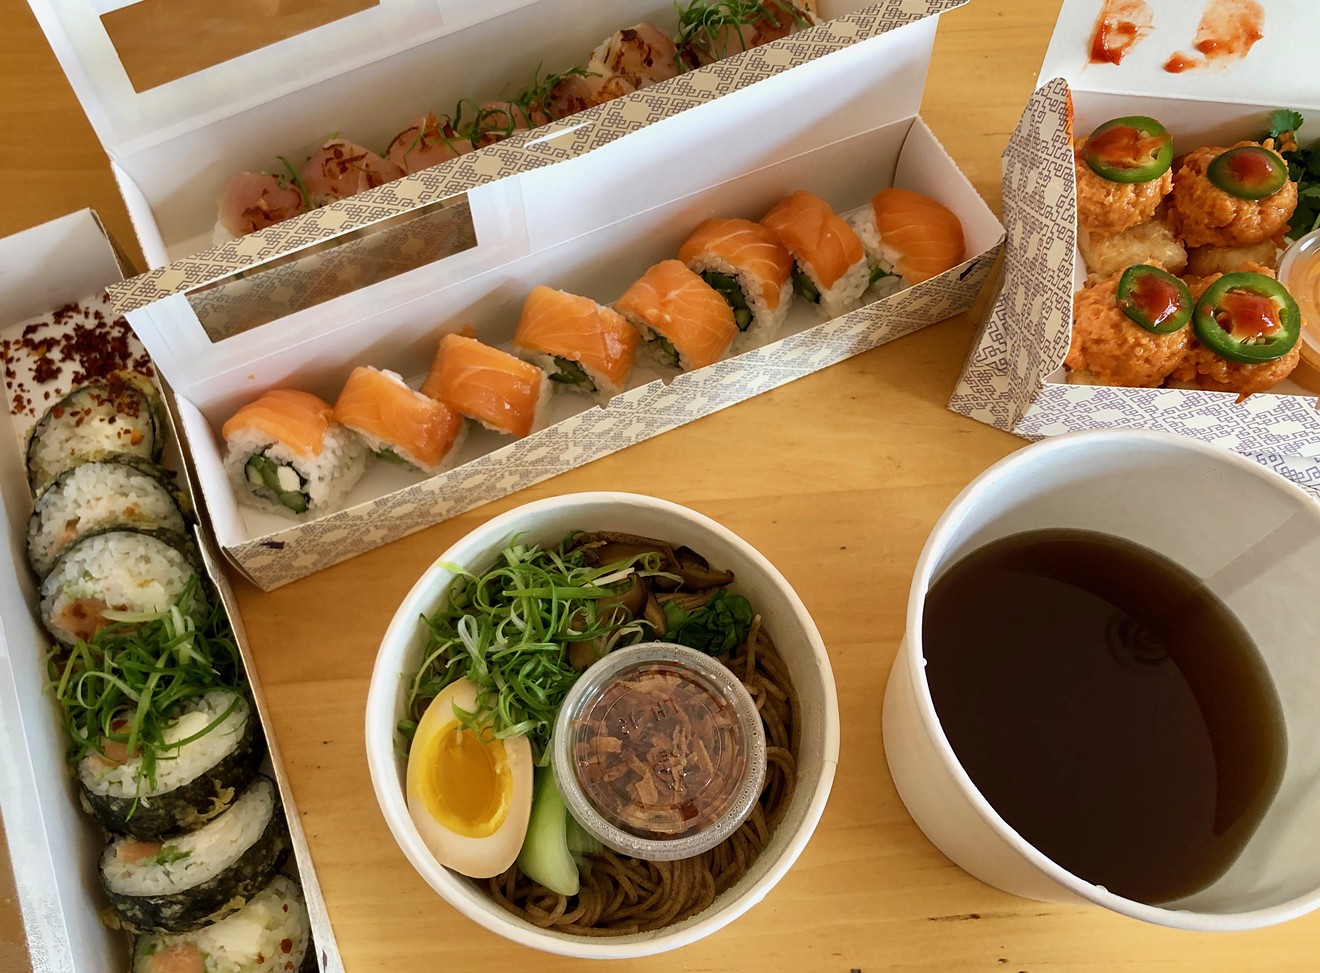 Some well-packaged takeout from Daruma sushi/roll/noodle.